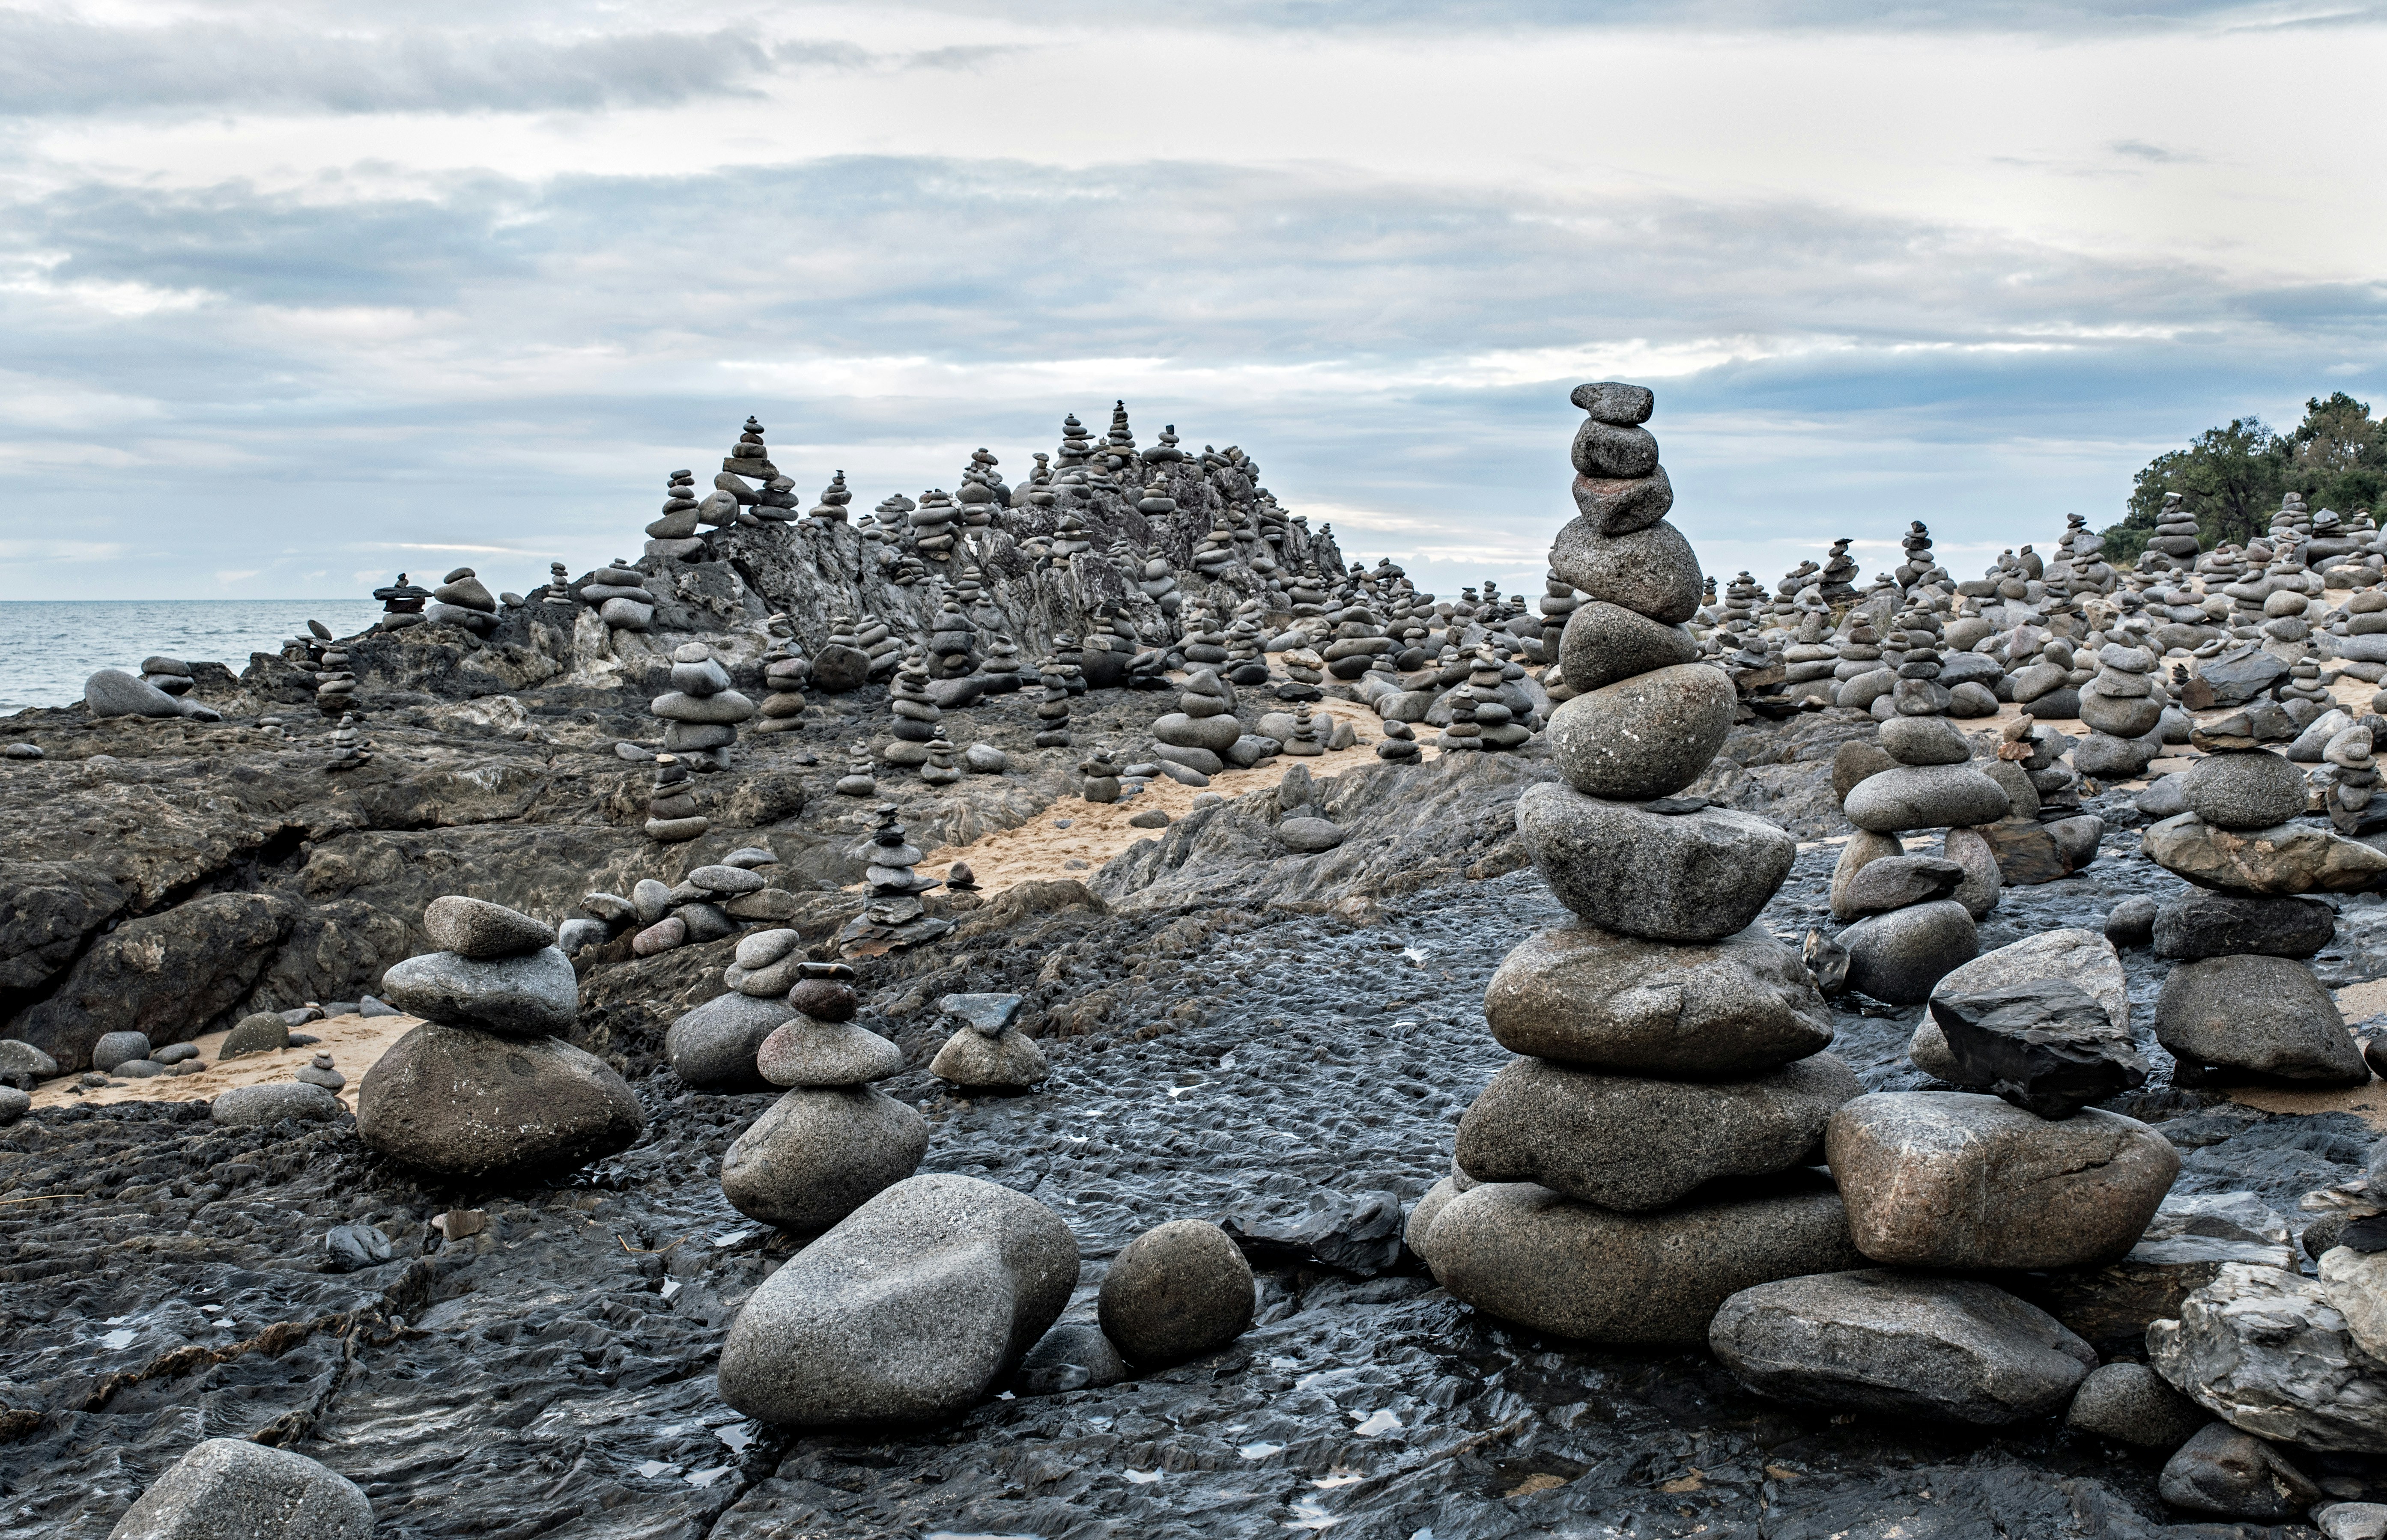 This spot has become very popular for people to balance stones on top of each other into towers, just for fun. The spot is between Ellis beach and Wangetti beach on the Captain Cook highway, North Queensland, Australia